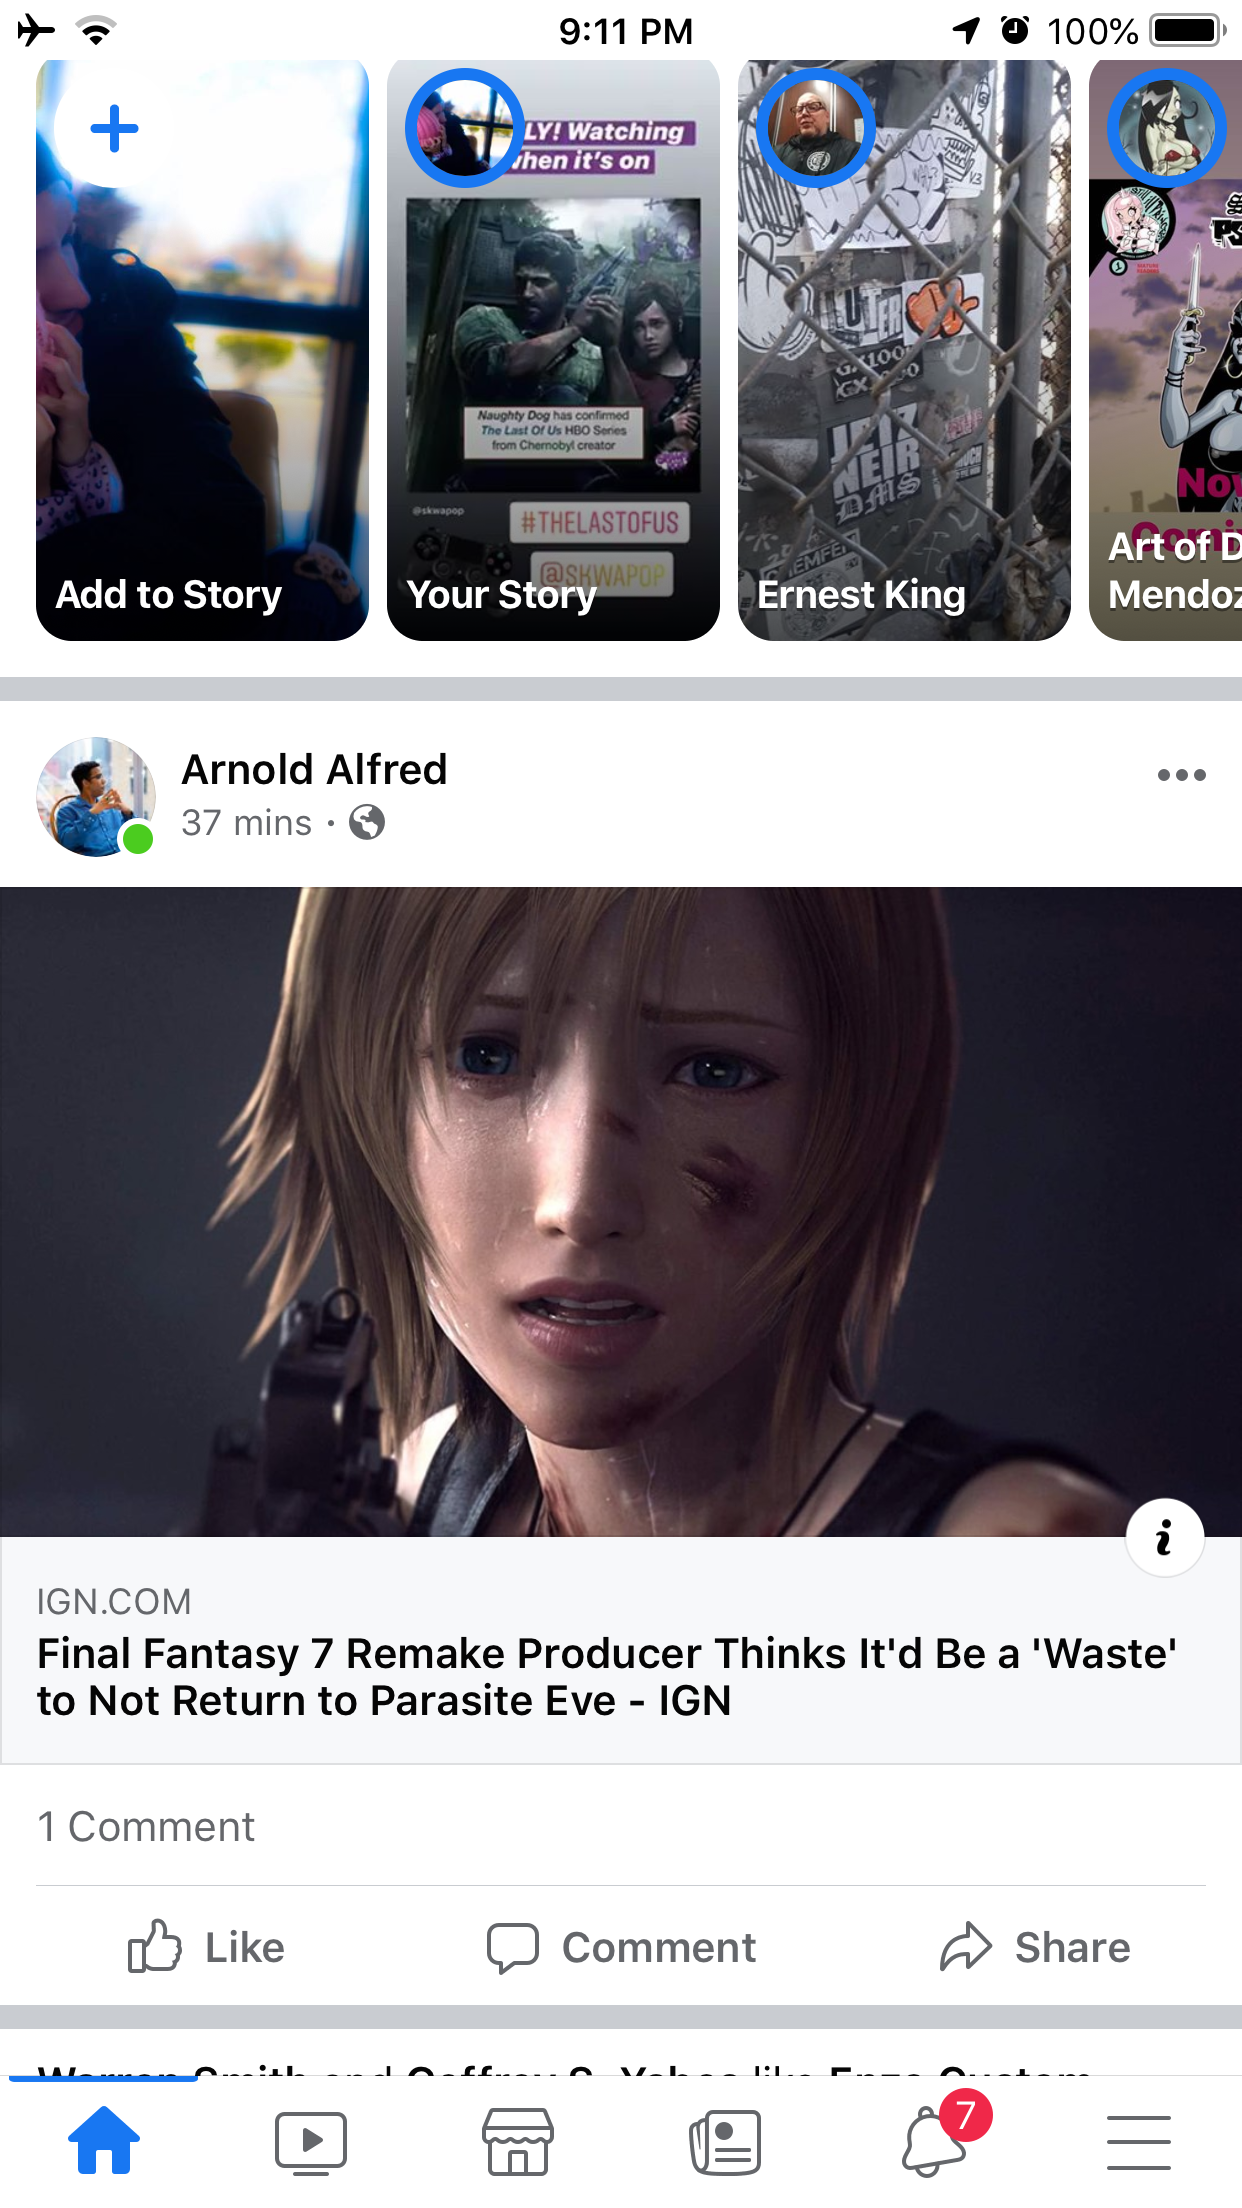 parasite eve the 3rd birthday - 10 100% T. Add to Story Your Story Ernest King Art of Mendo. Arnold Alfred 37 mins Ign.Com Final Fantasy 7 Remake Producer Thinks it'd Be a 'Waste to Not Return to Parasite Eve Ign 1 Comment Comment